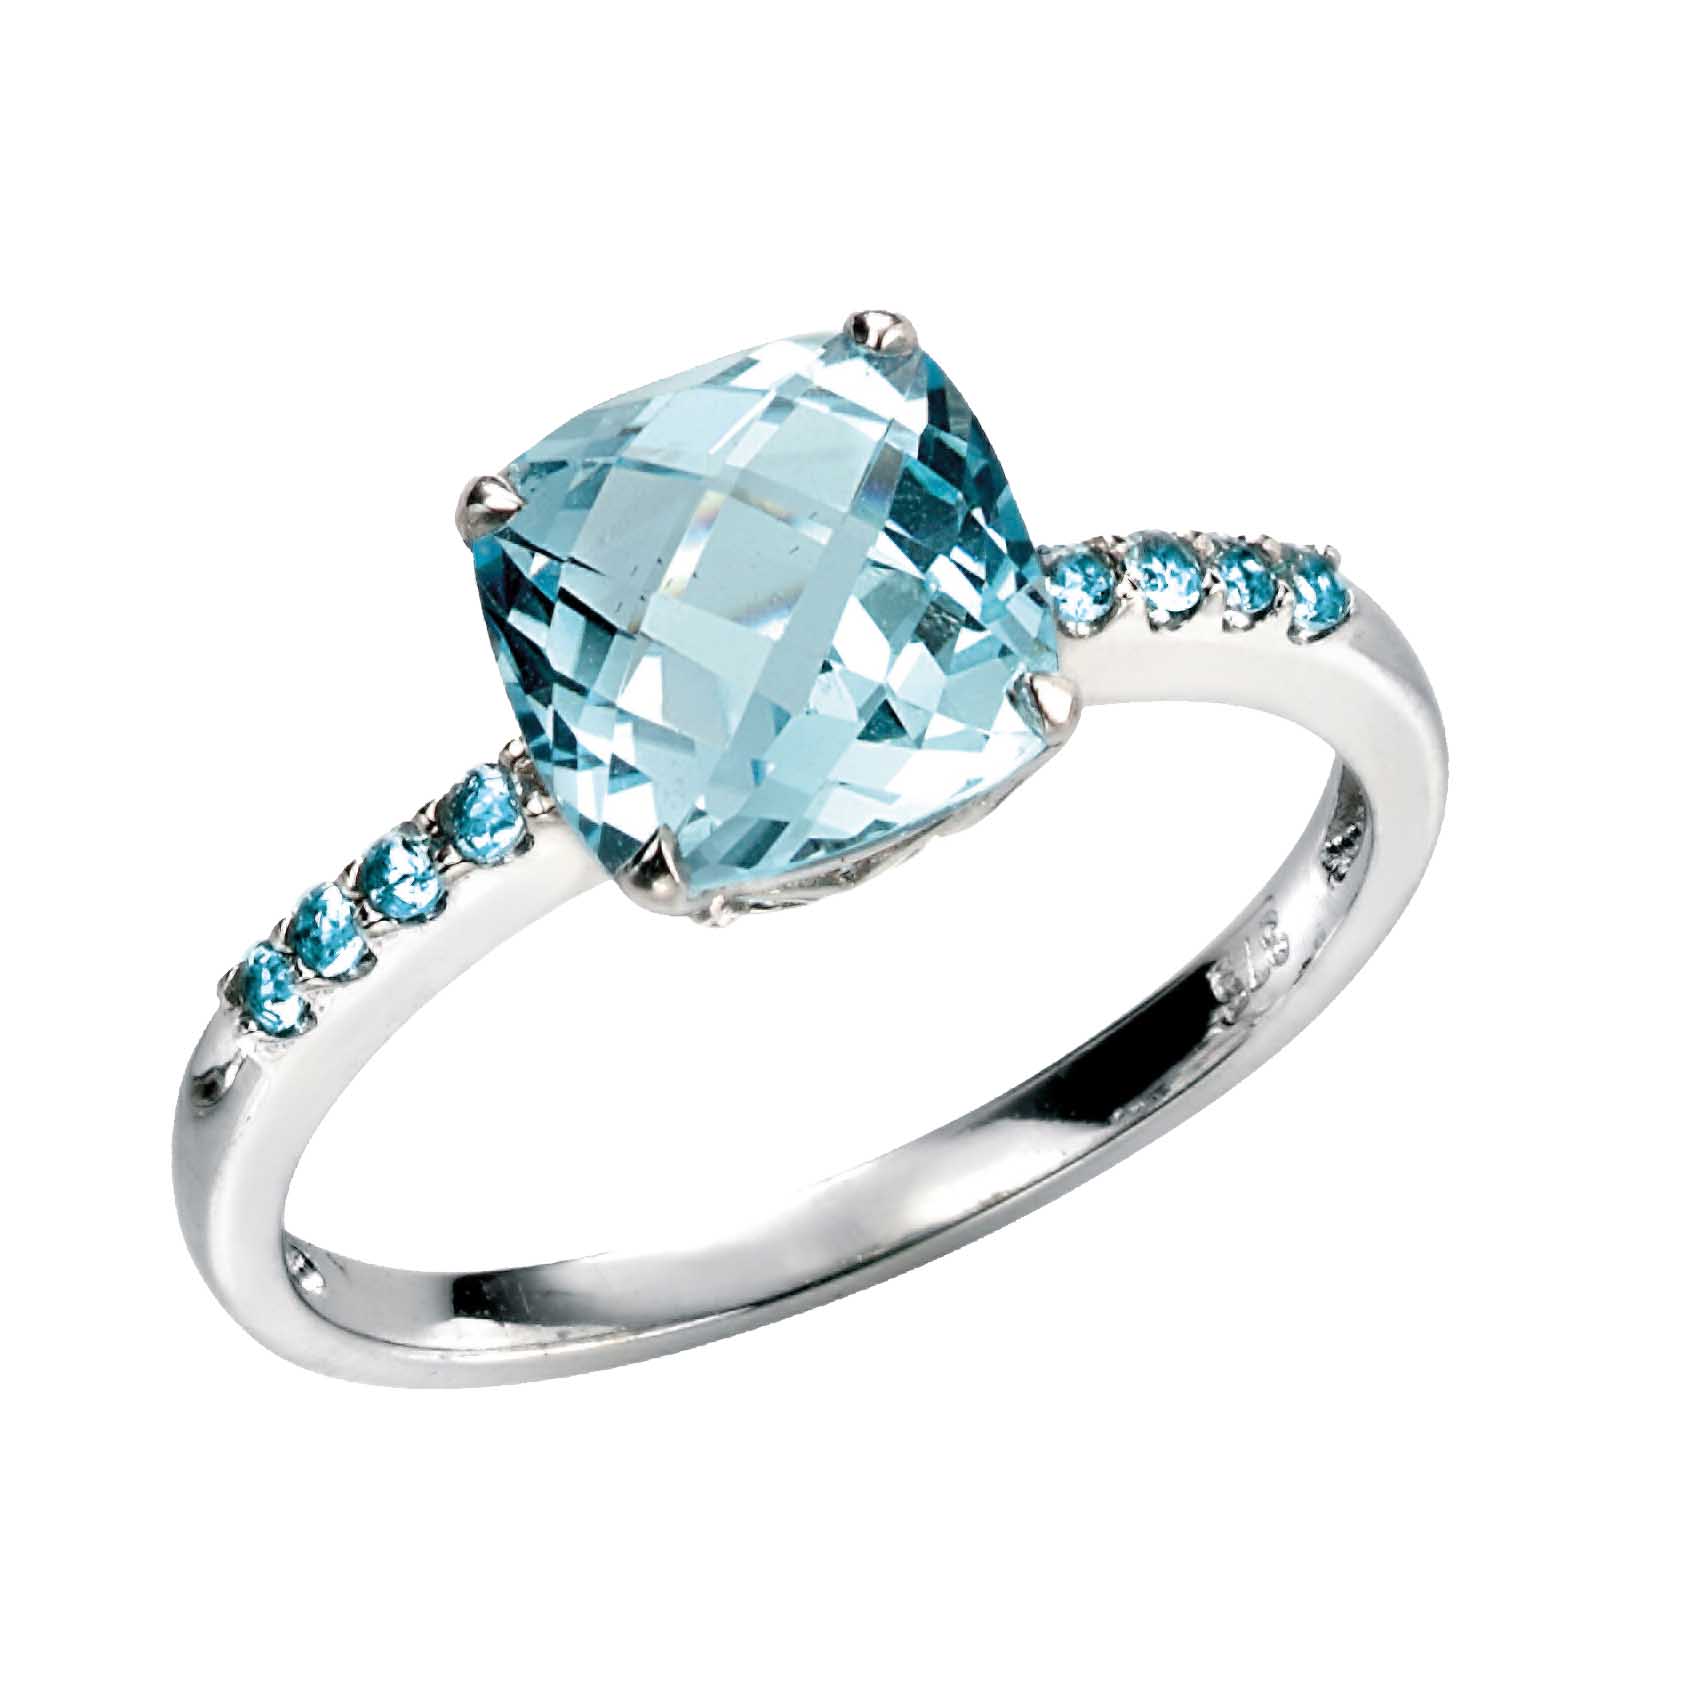 9ct white gold sky blue topaz ring on Sally Thorntons jewellery blog from AA Thornton Kettering Northampton 